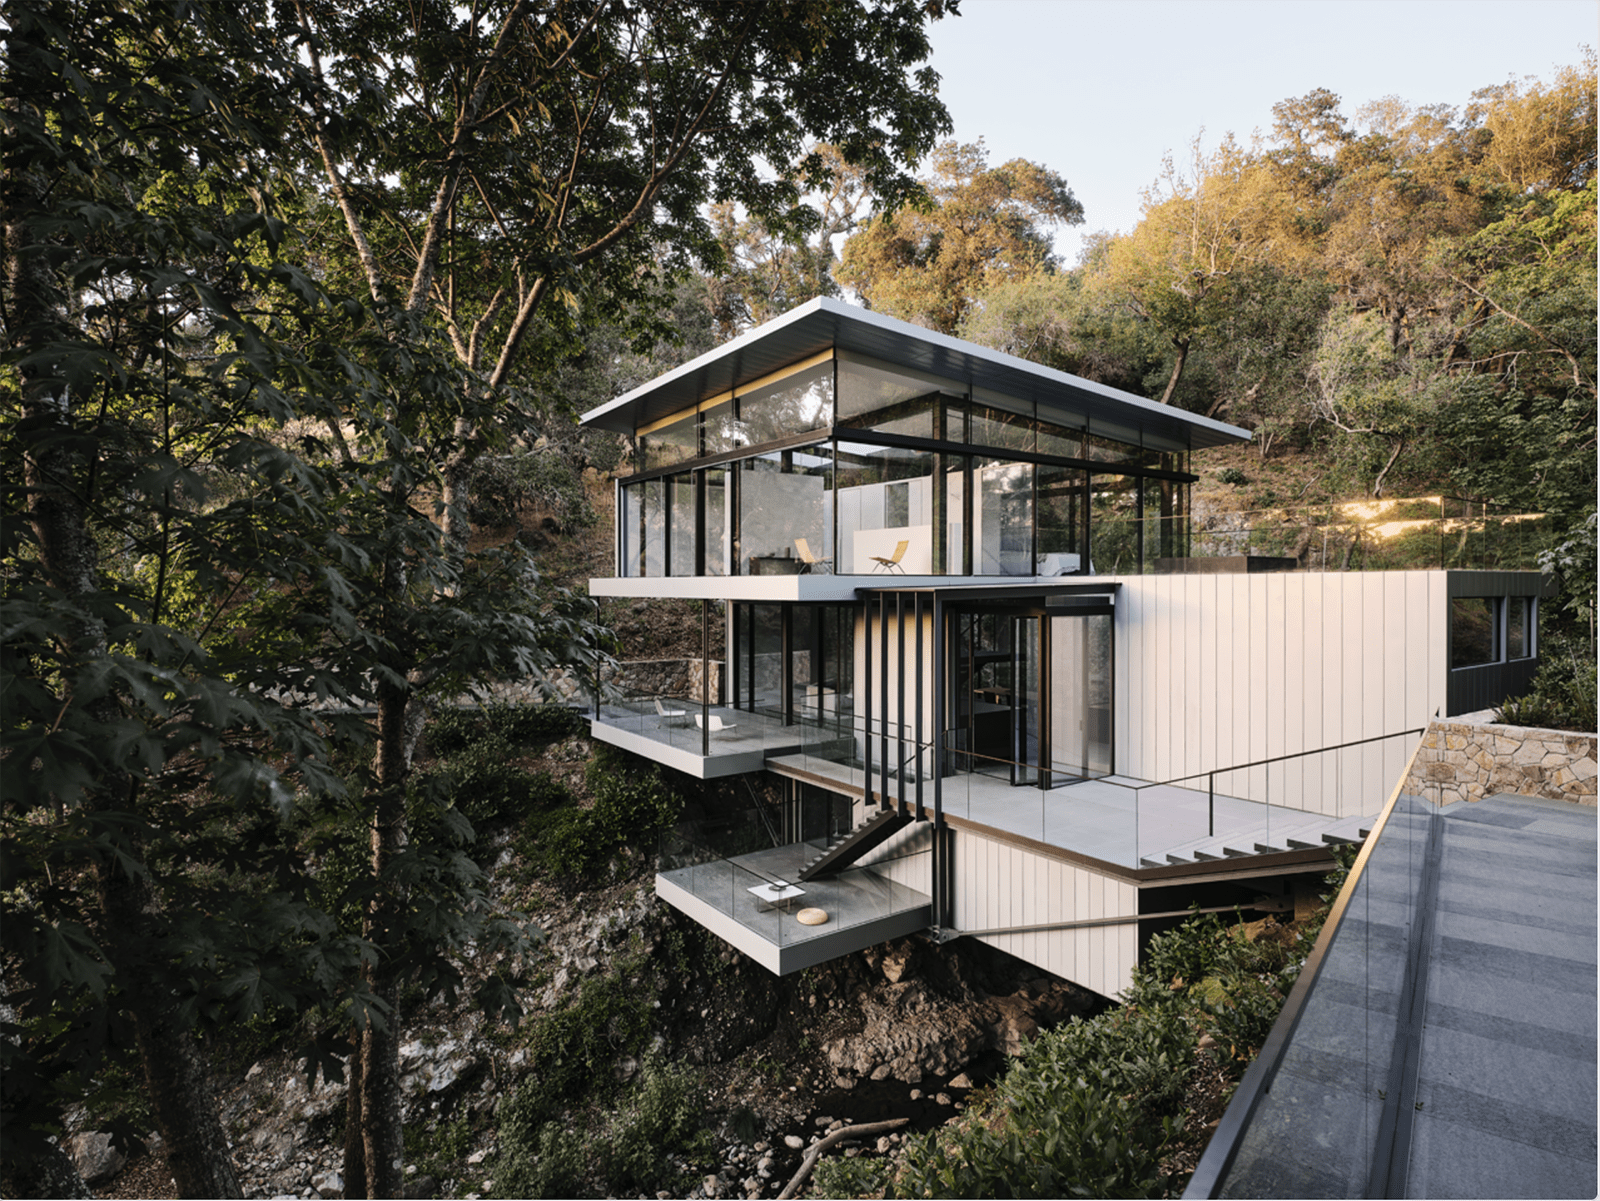 A house suspended on rocks in a forest landscape